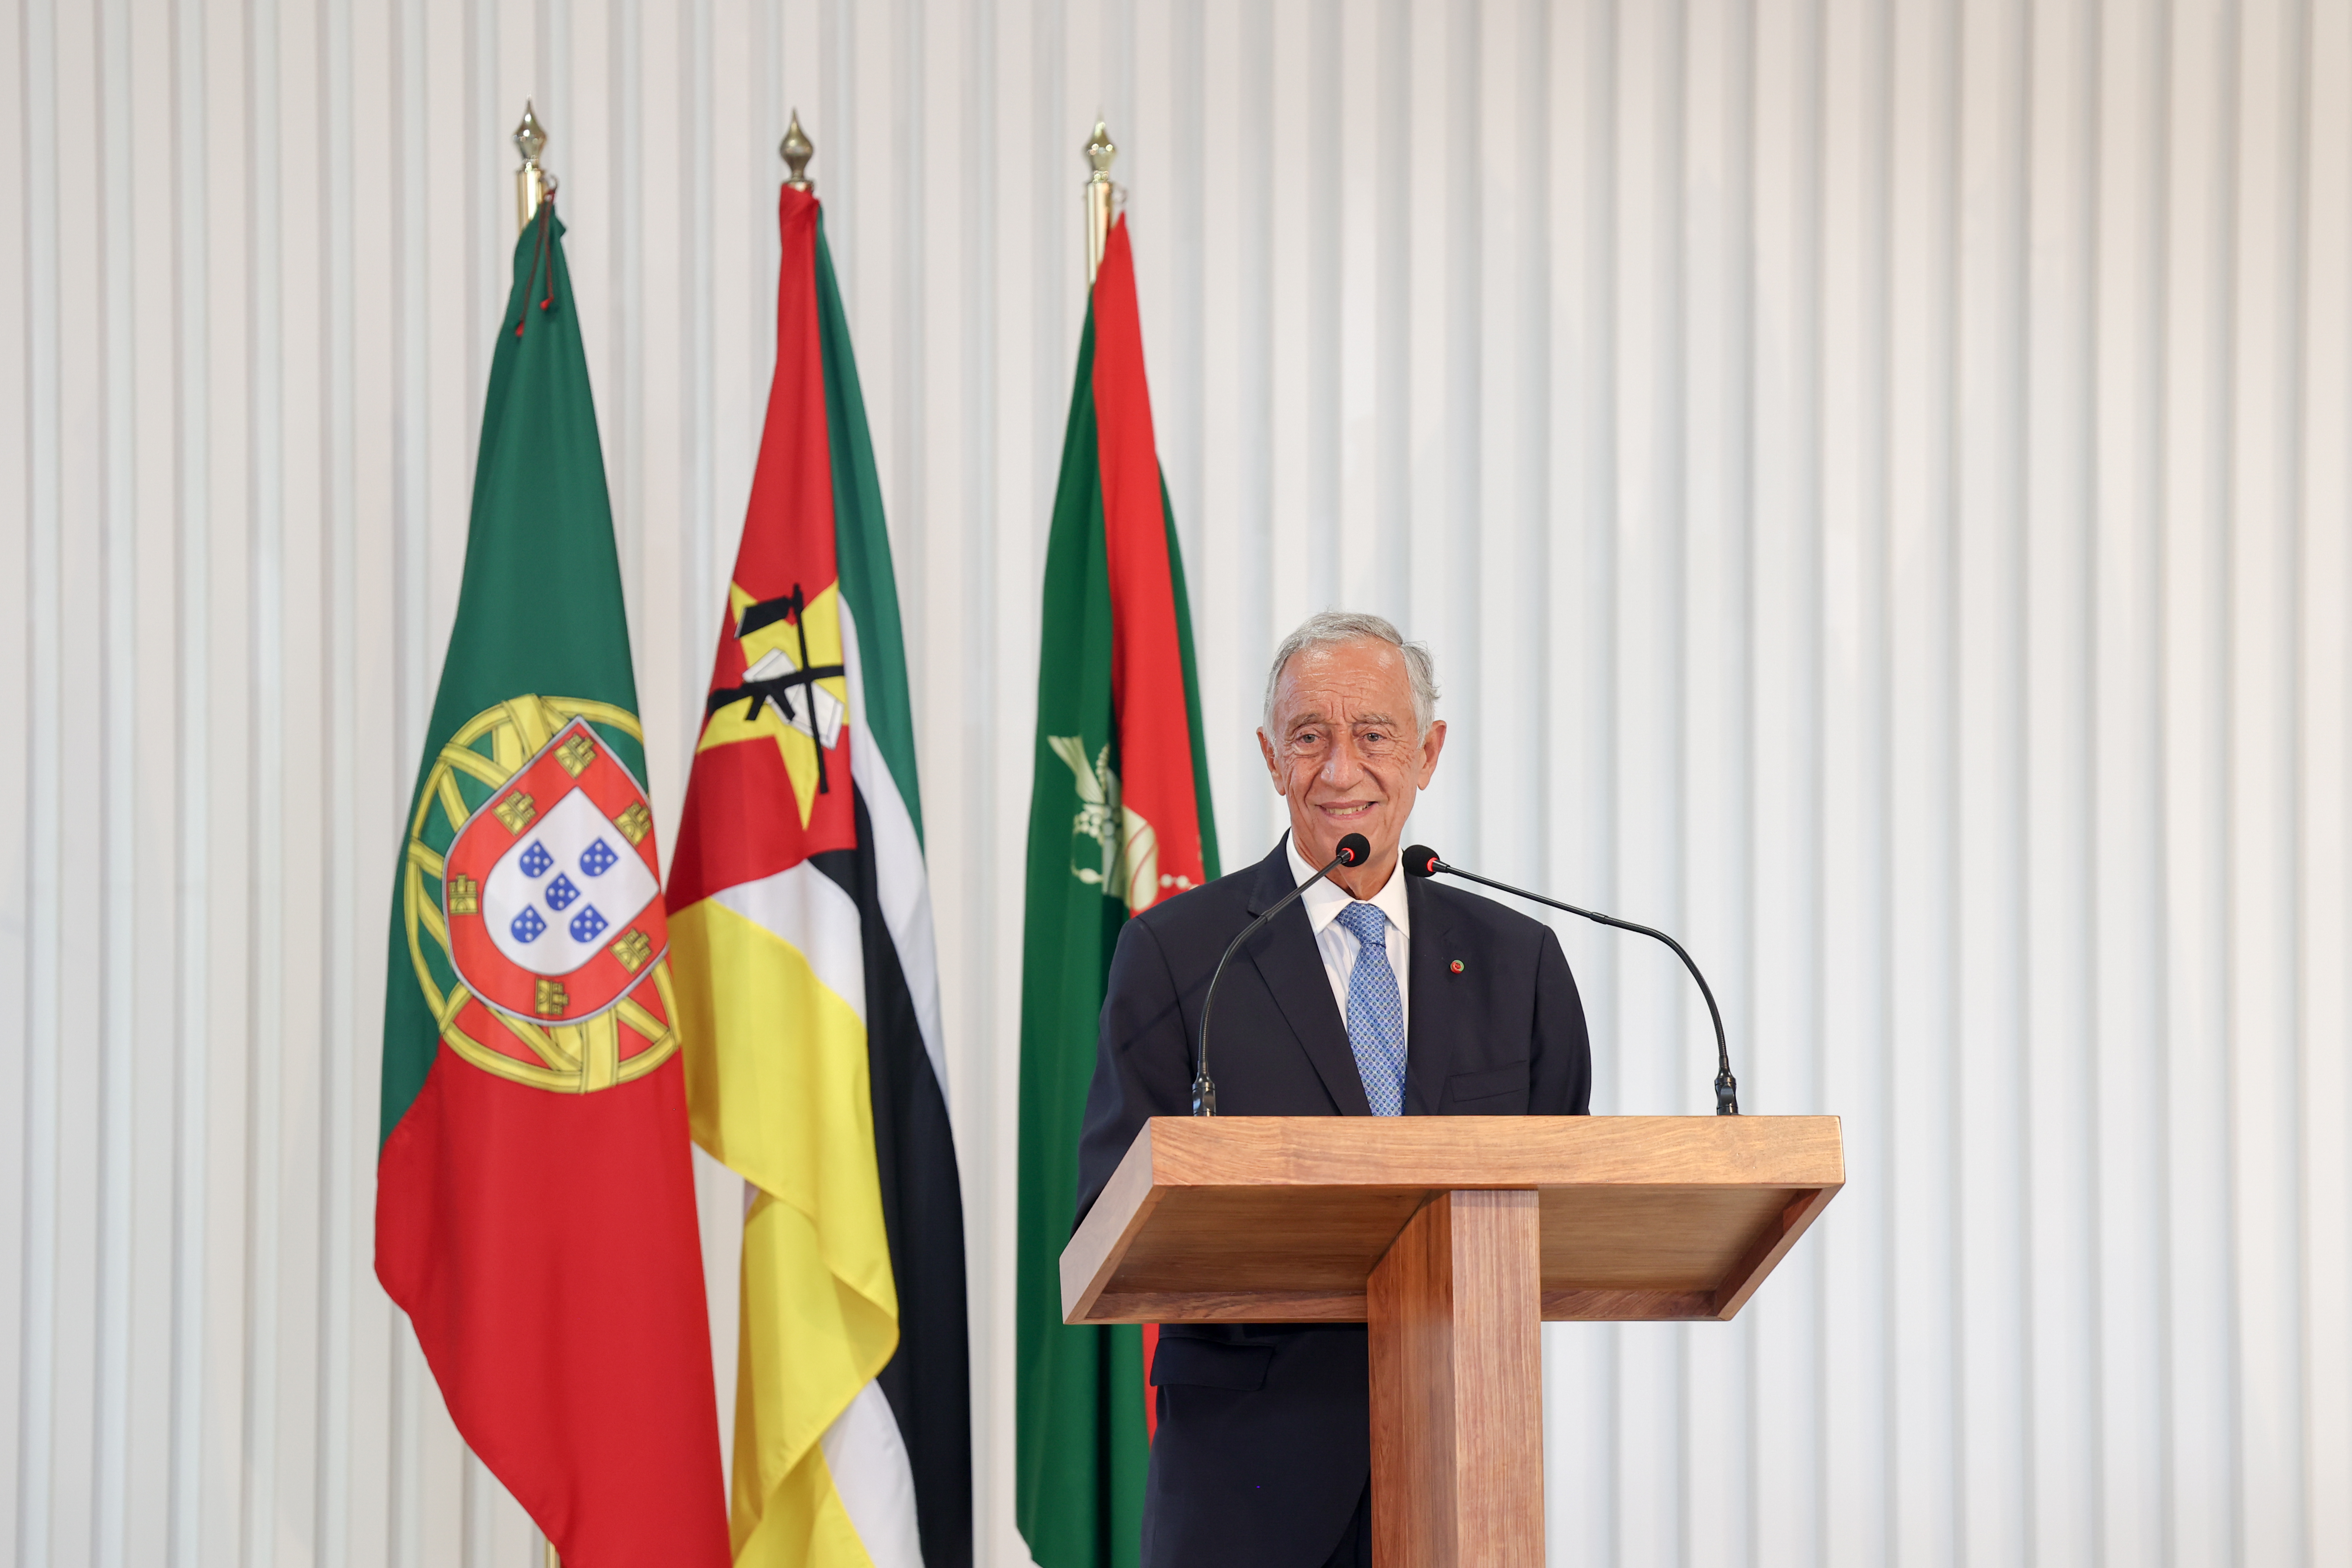 Portugal's President Marcelo Rebelo de Sousa speaking at the inauguration ceremony of the Aga Khan Academy Maputo on 19 March 2022.